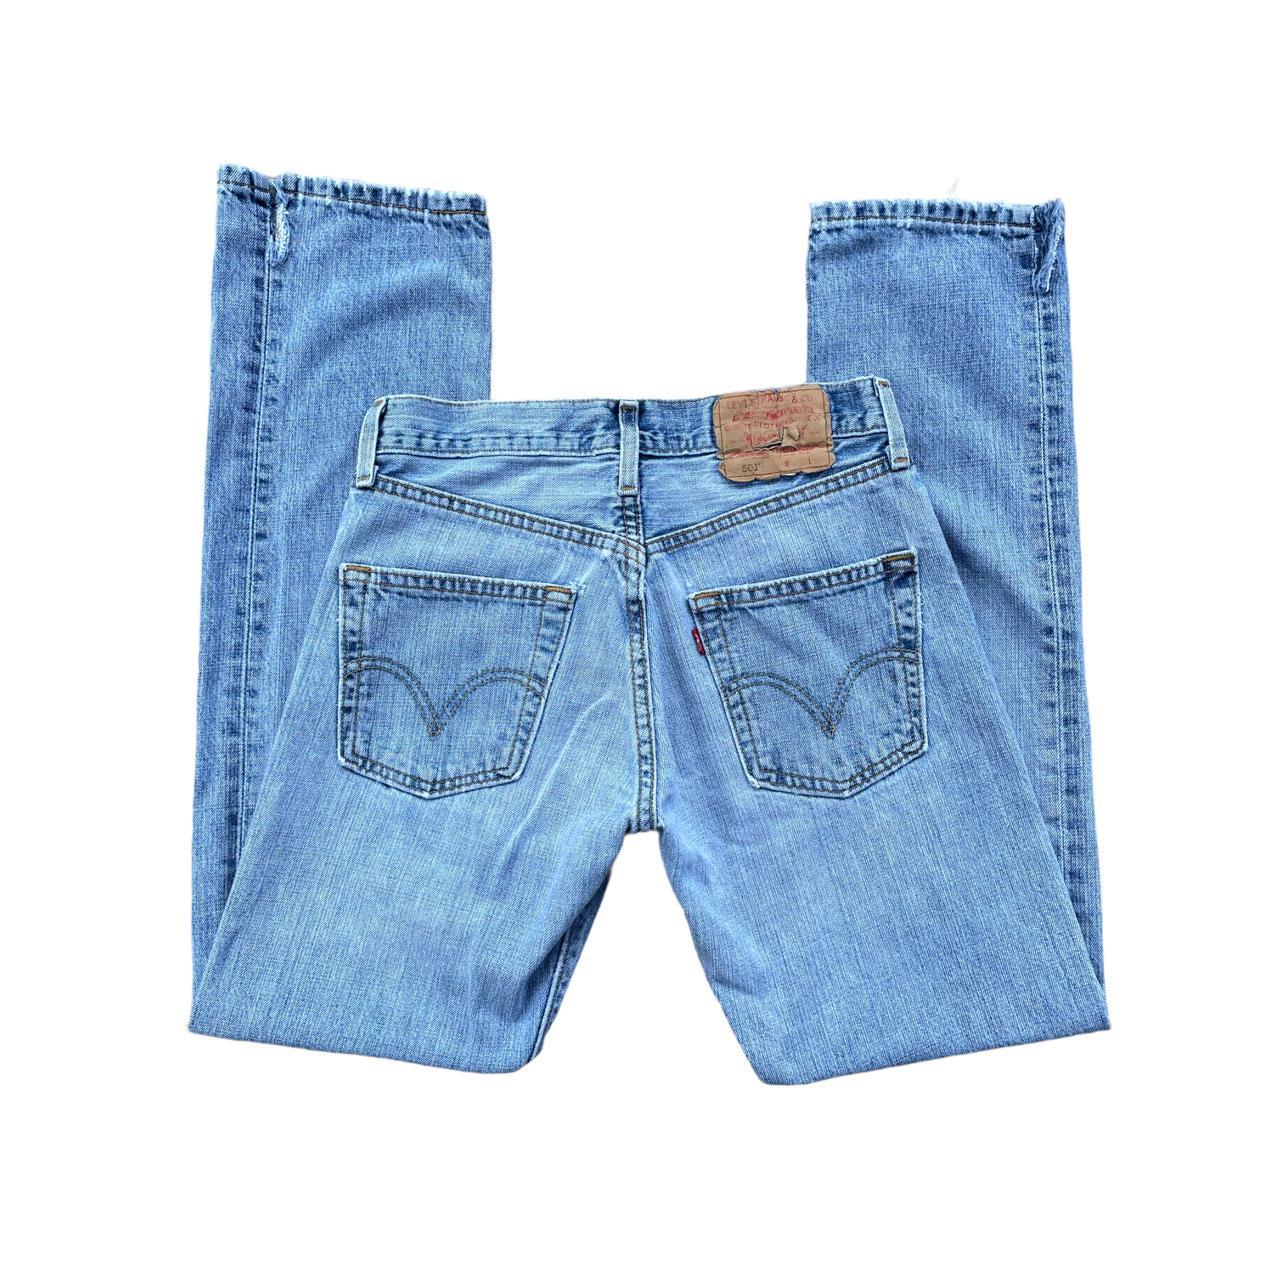 Product Image 1 - Y2K Grunge Levi’s 501 Jeans

Perfectly